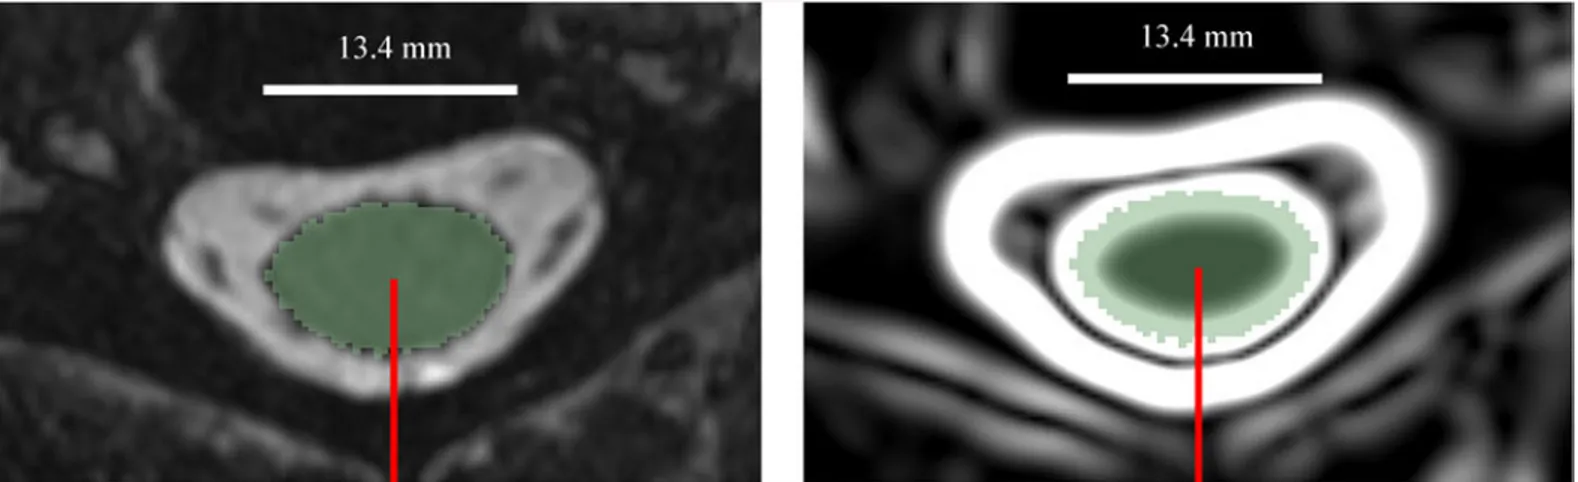 Fig 2. An axial slice of the MR image (left) and the gradient image (right) of the cervical spinal cord